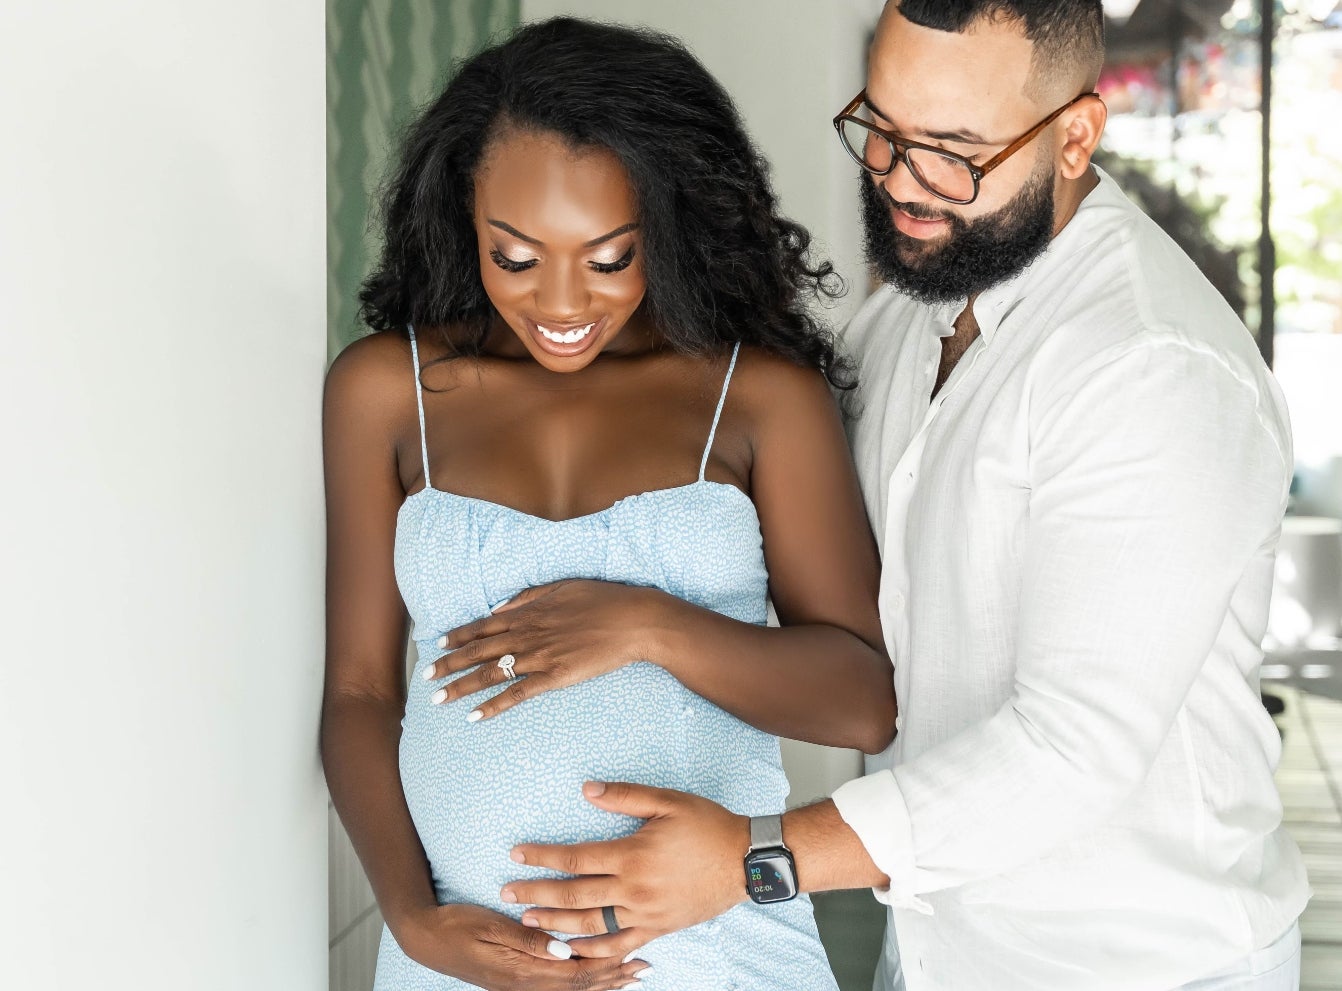 Exclusive: 'Married At First Sight' Alums Briana And Vincent Are Expecting Their First Child!